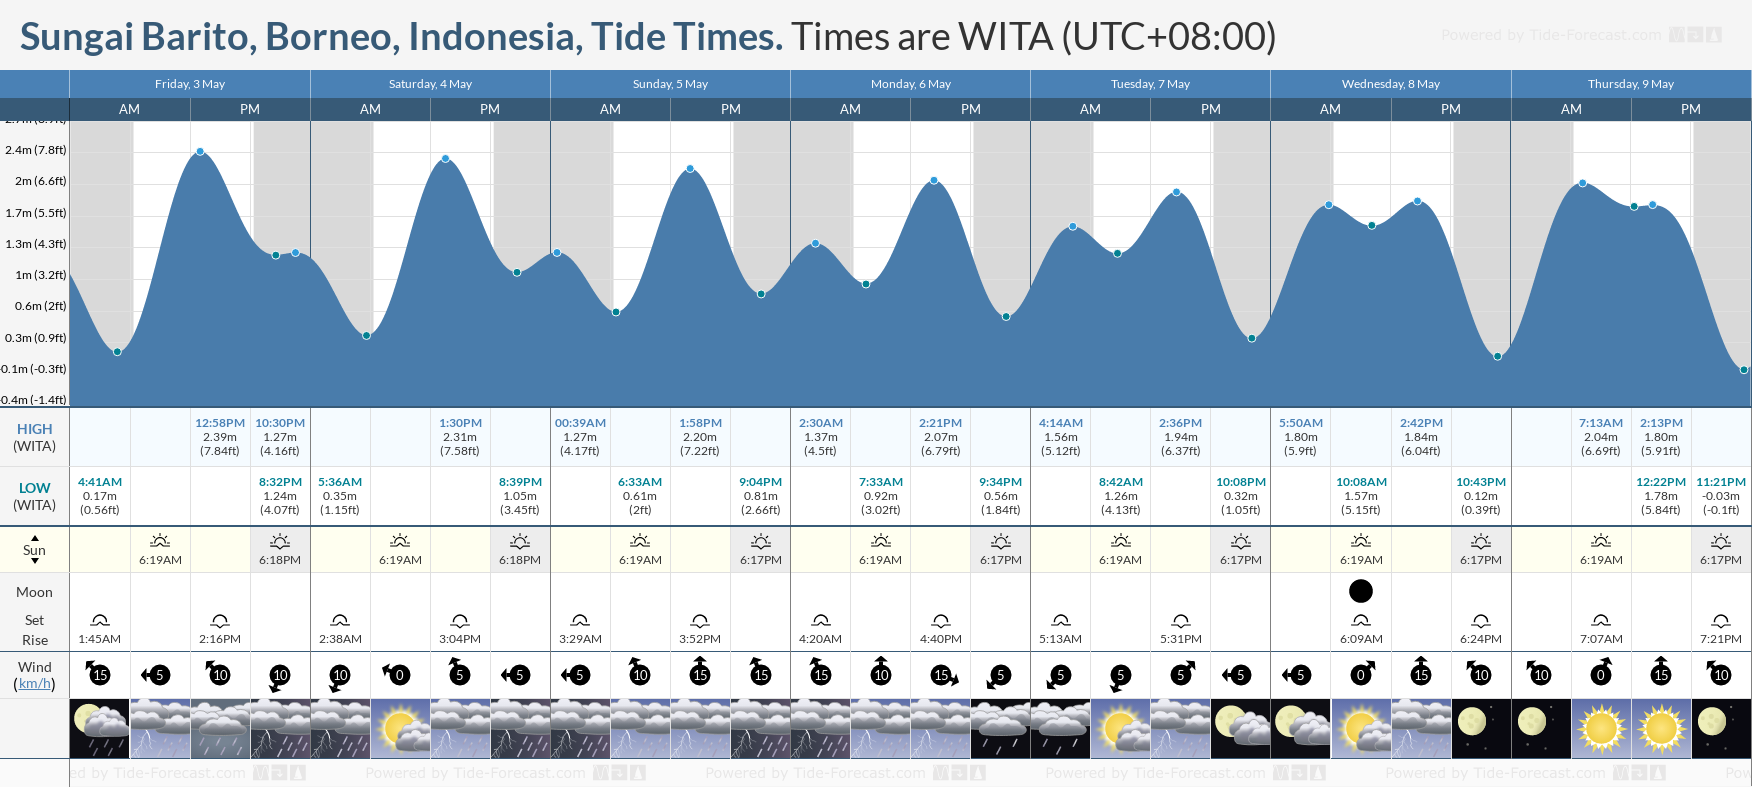 Sungai Barito, Borneo, Indonesia Tide Chart including high and low tide tide times for the next 7 days